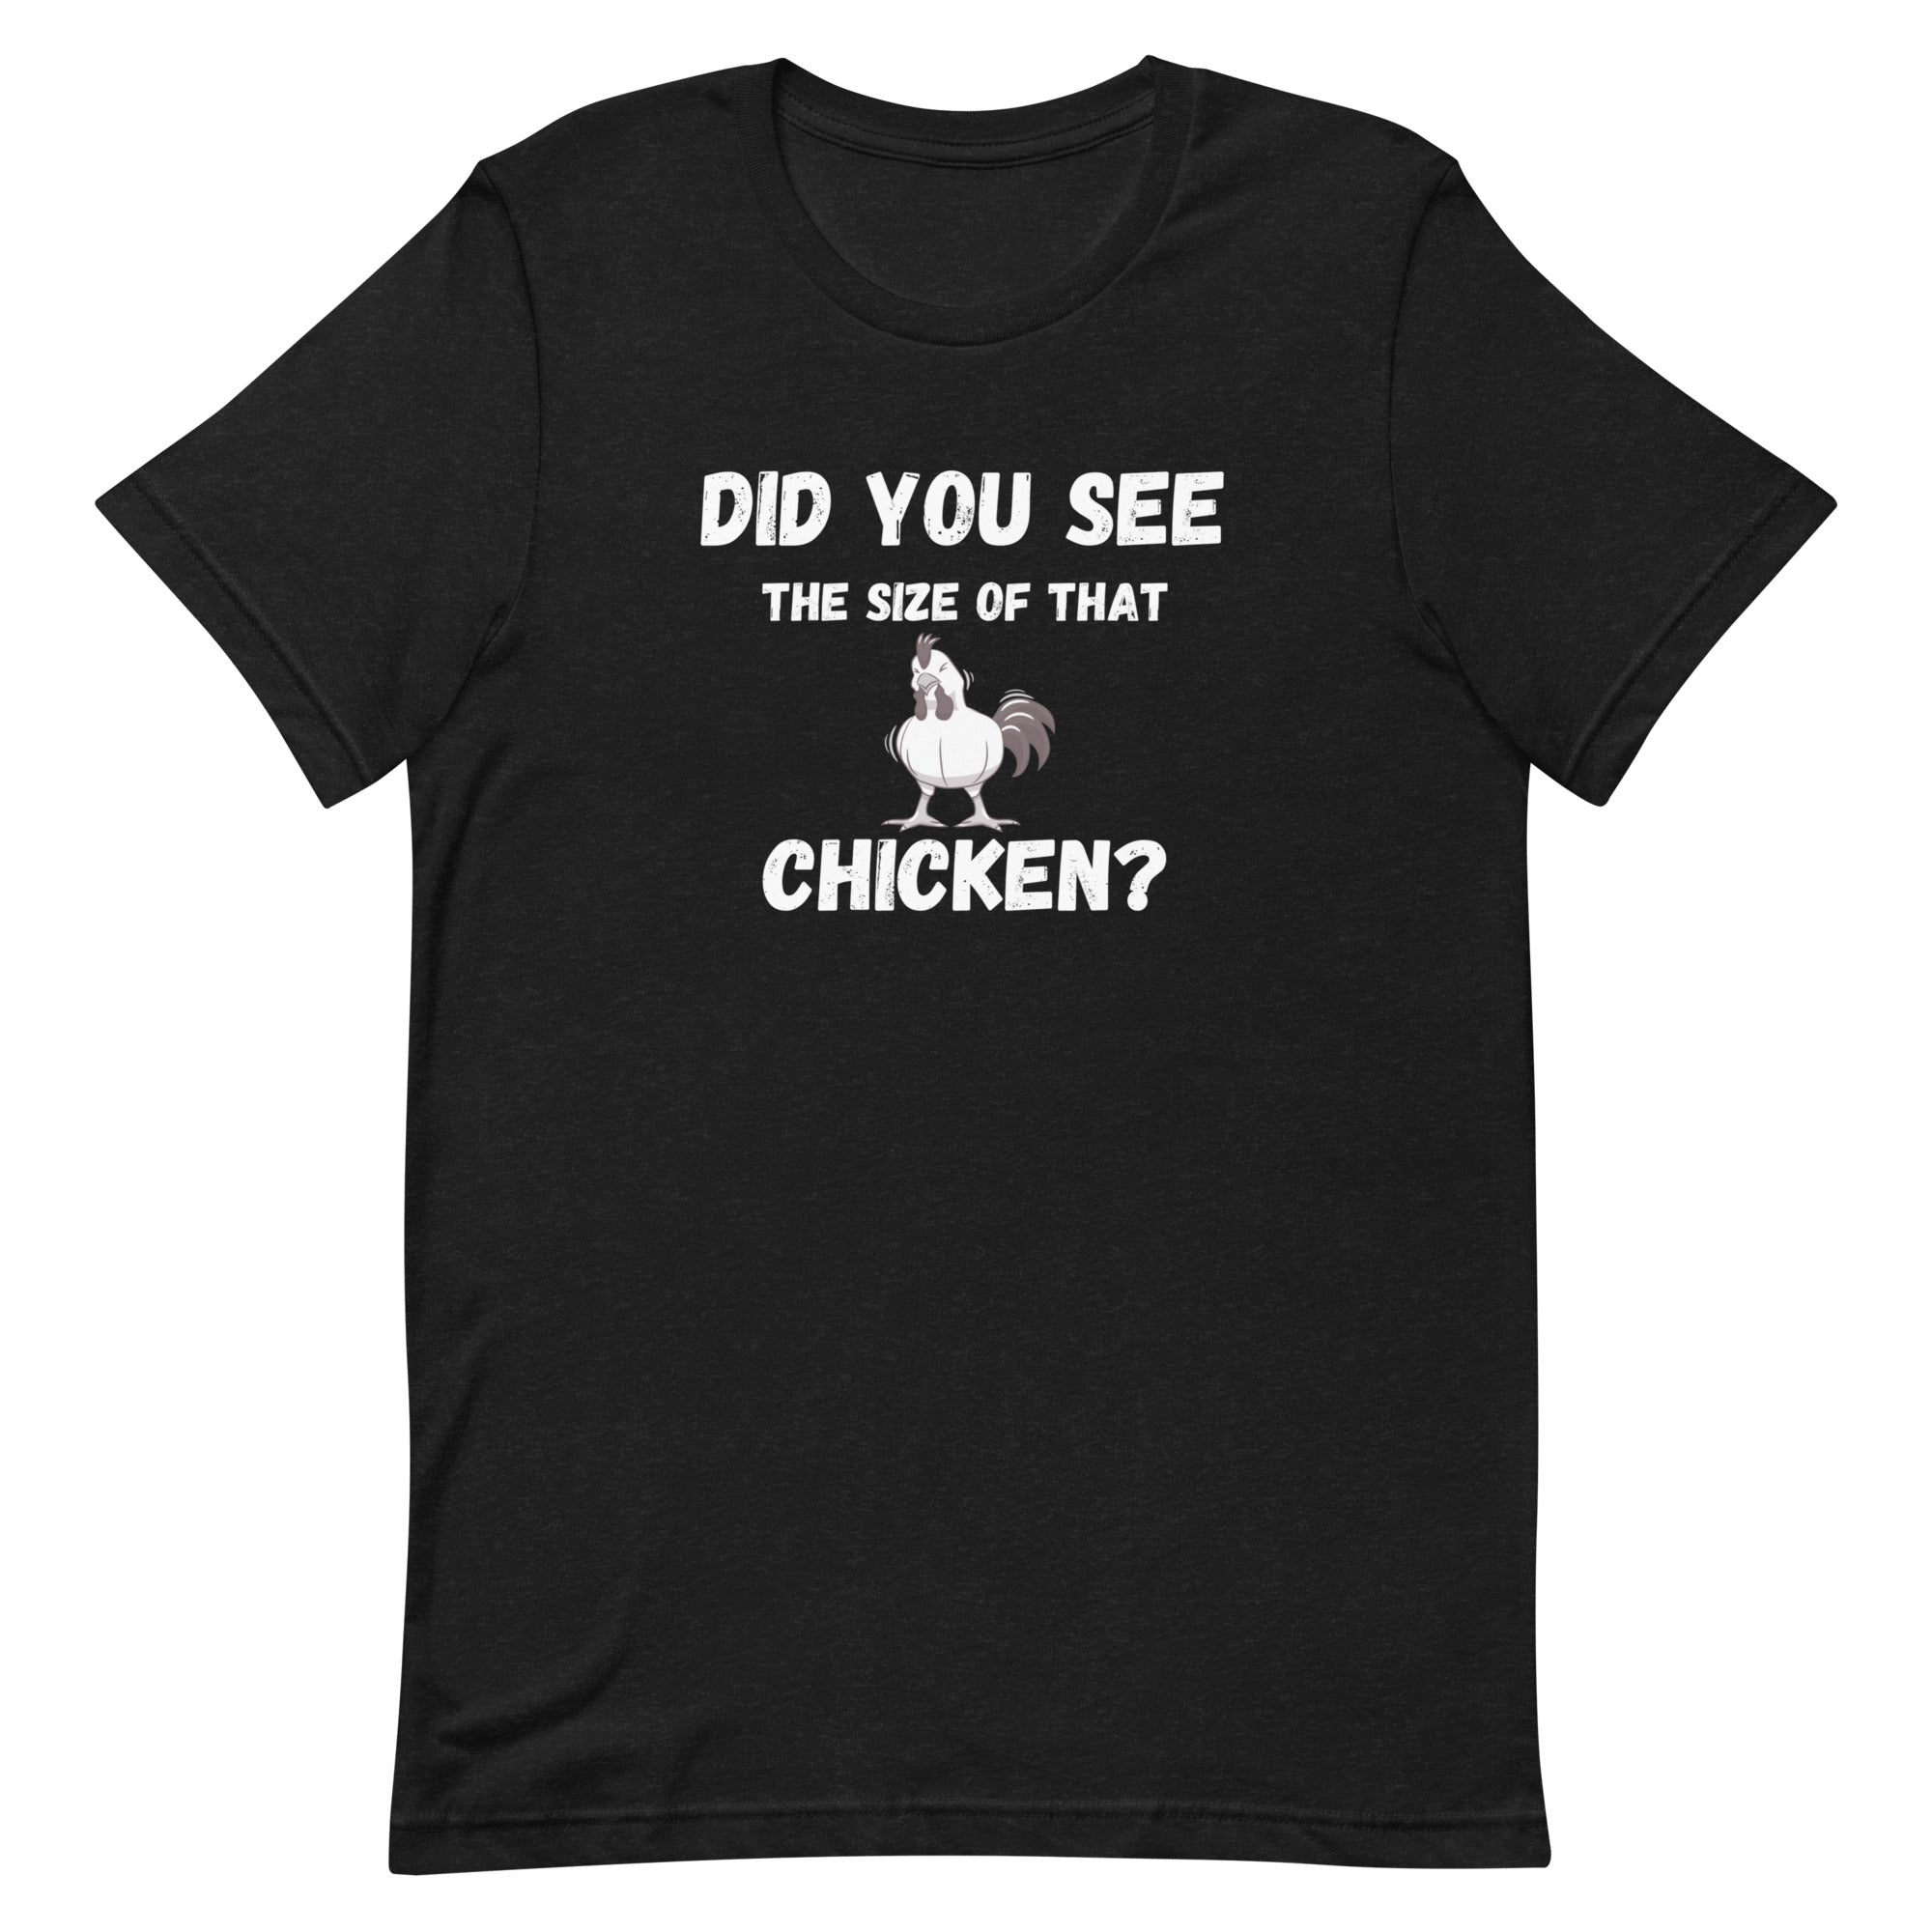 Size of That Chicken T-Shirt